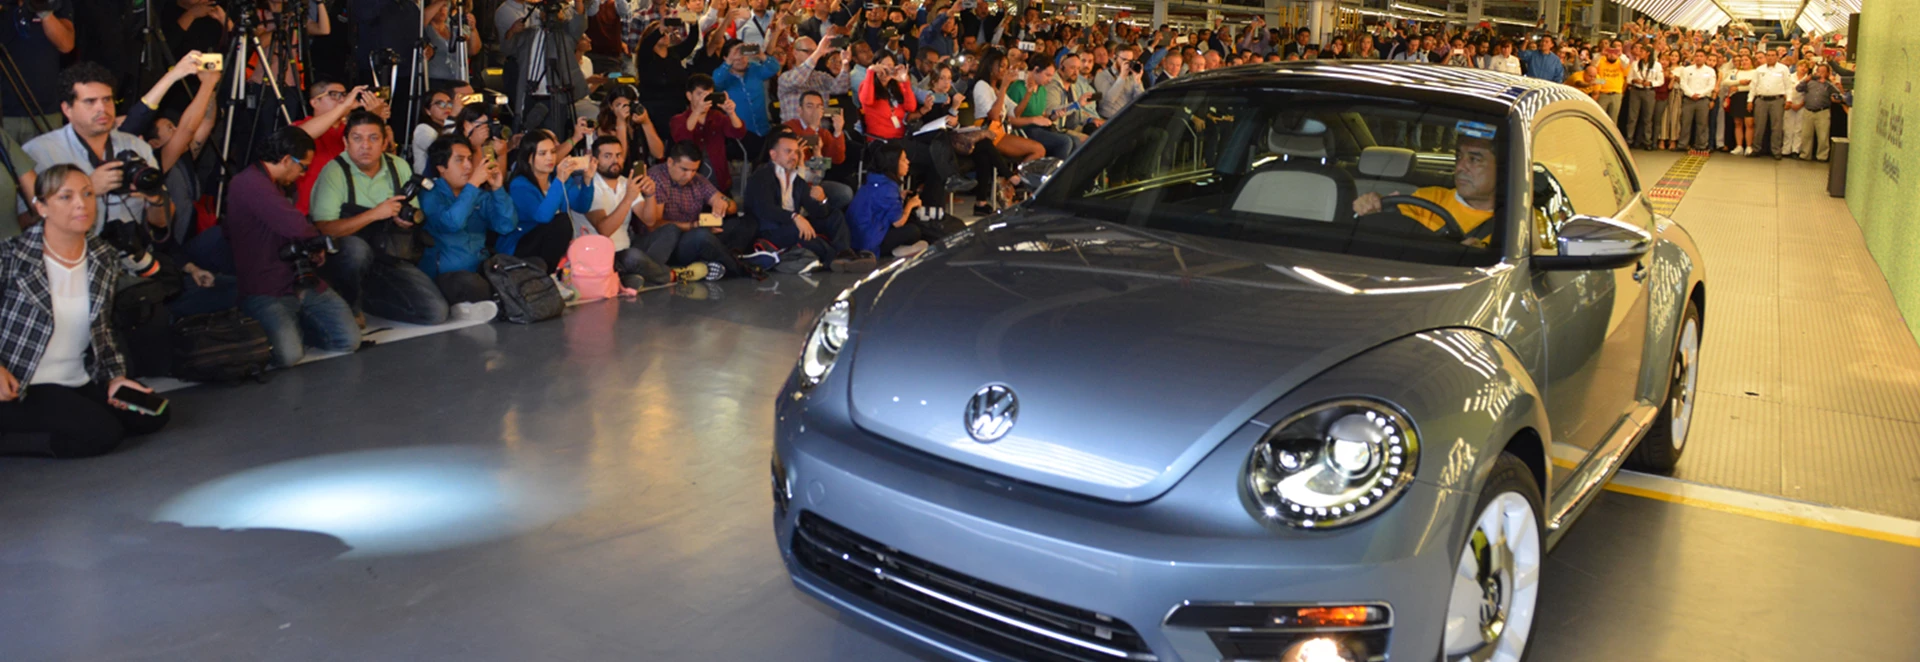 Volkswagen Beetle production comes to an end